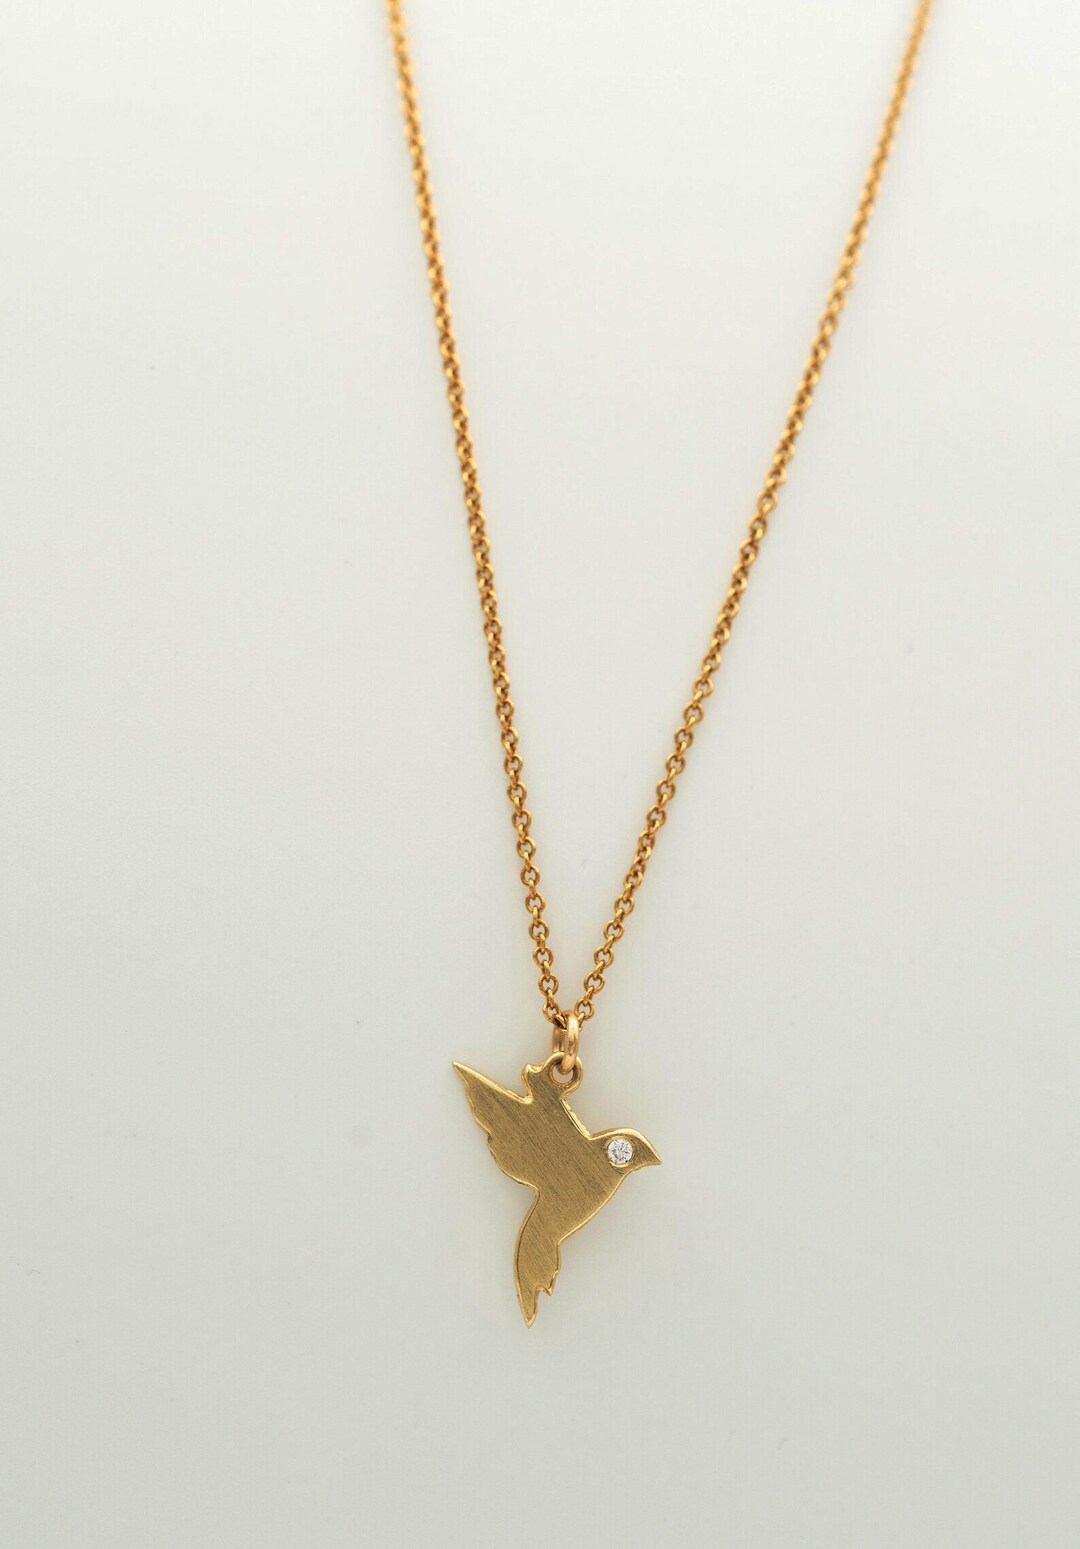 Flying Bird Gold Necklace 14k Solid Gold Dove Necklace - Etsy